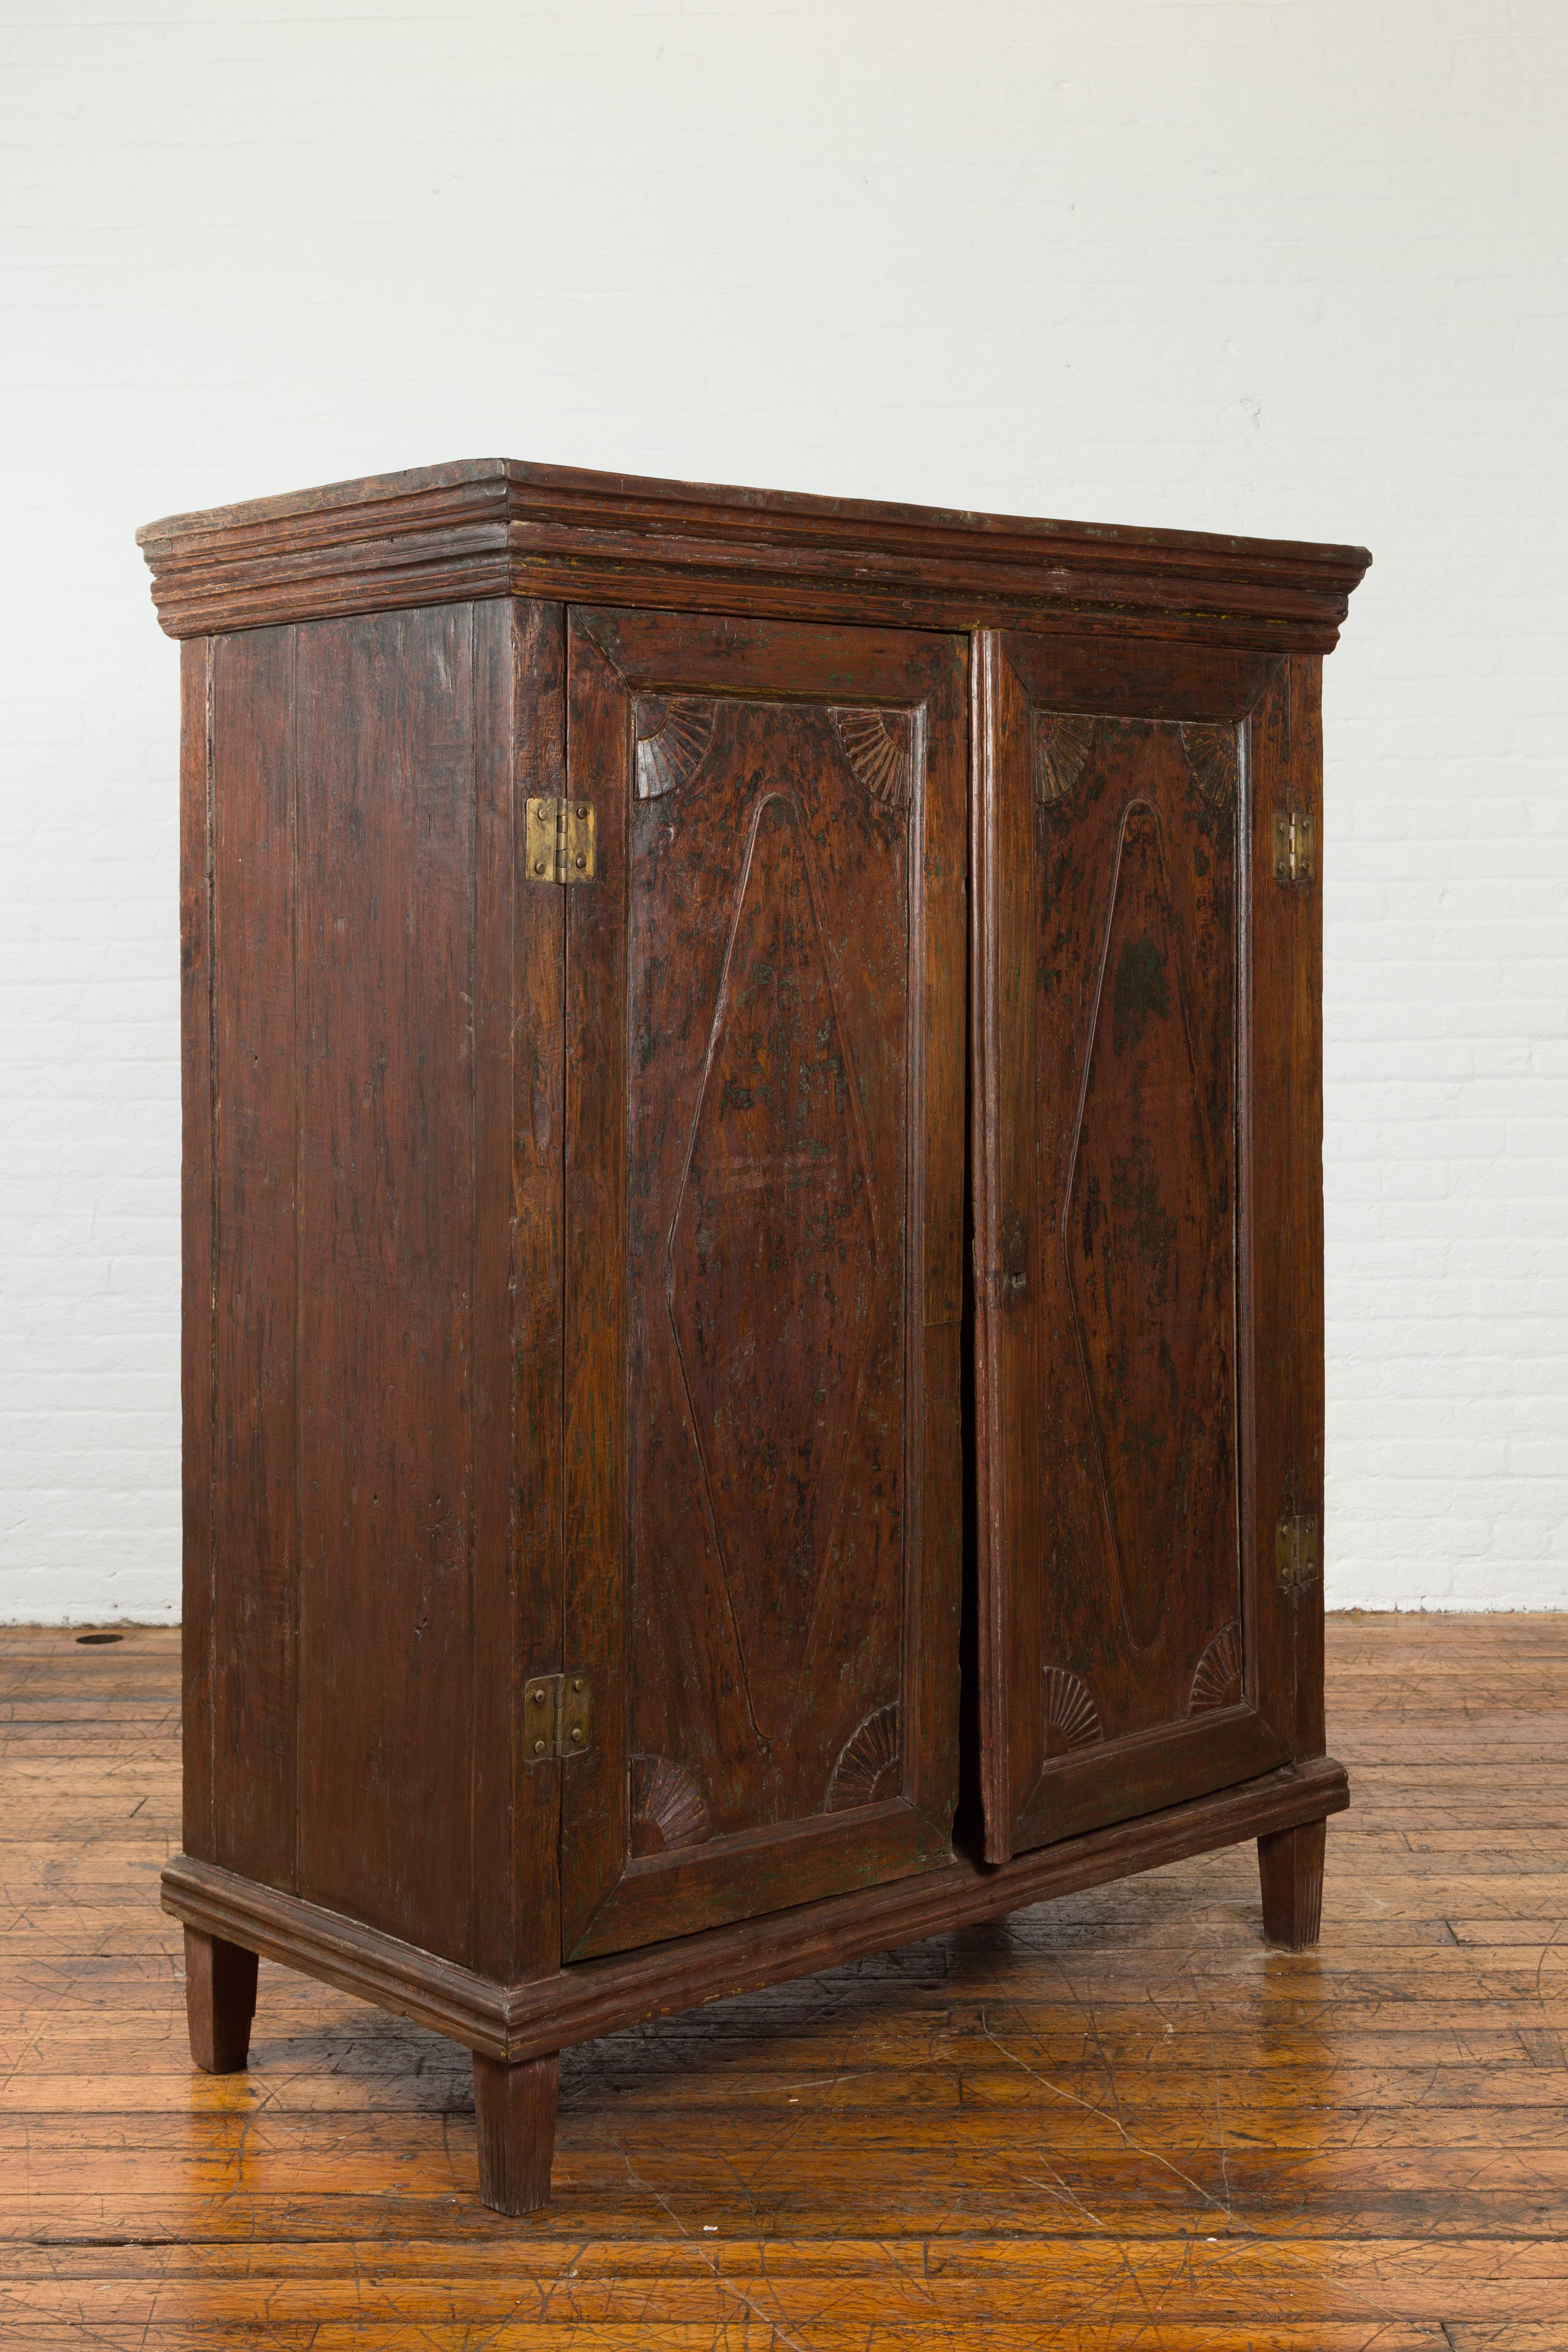 An Indonesian large antique cabinet from the 19th century with elongated diamond shapes on the front of the double doors and scalloped fans featured on each of the door's corners. Our tall teak wood antique cabinet features a molded bordered top